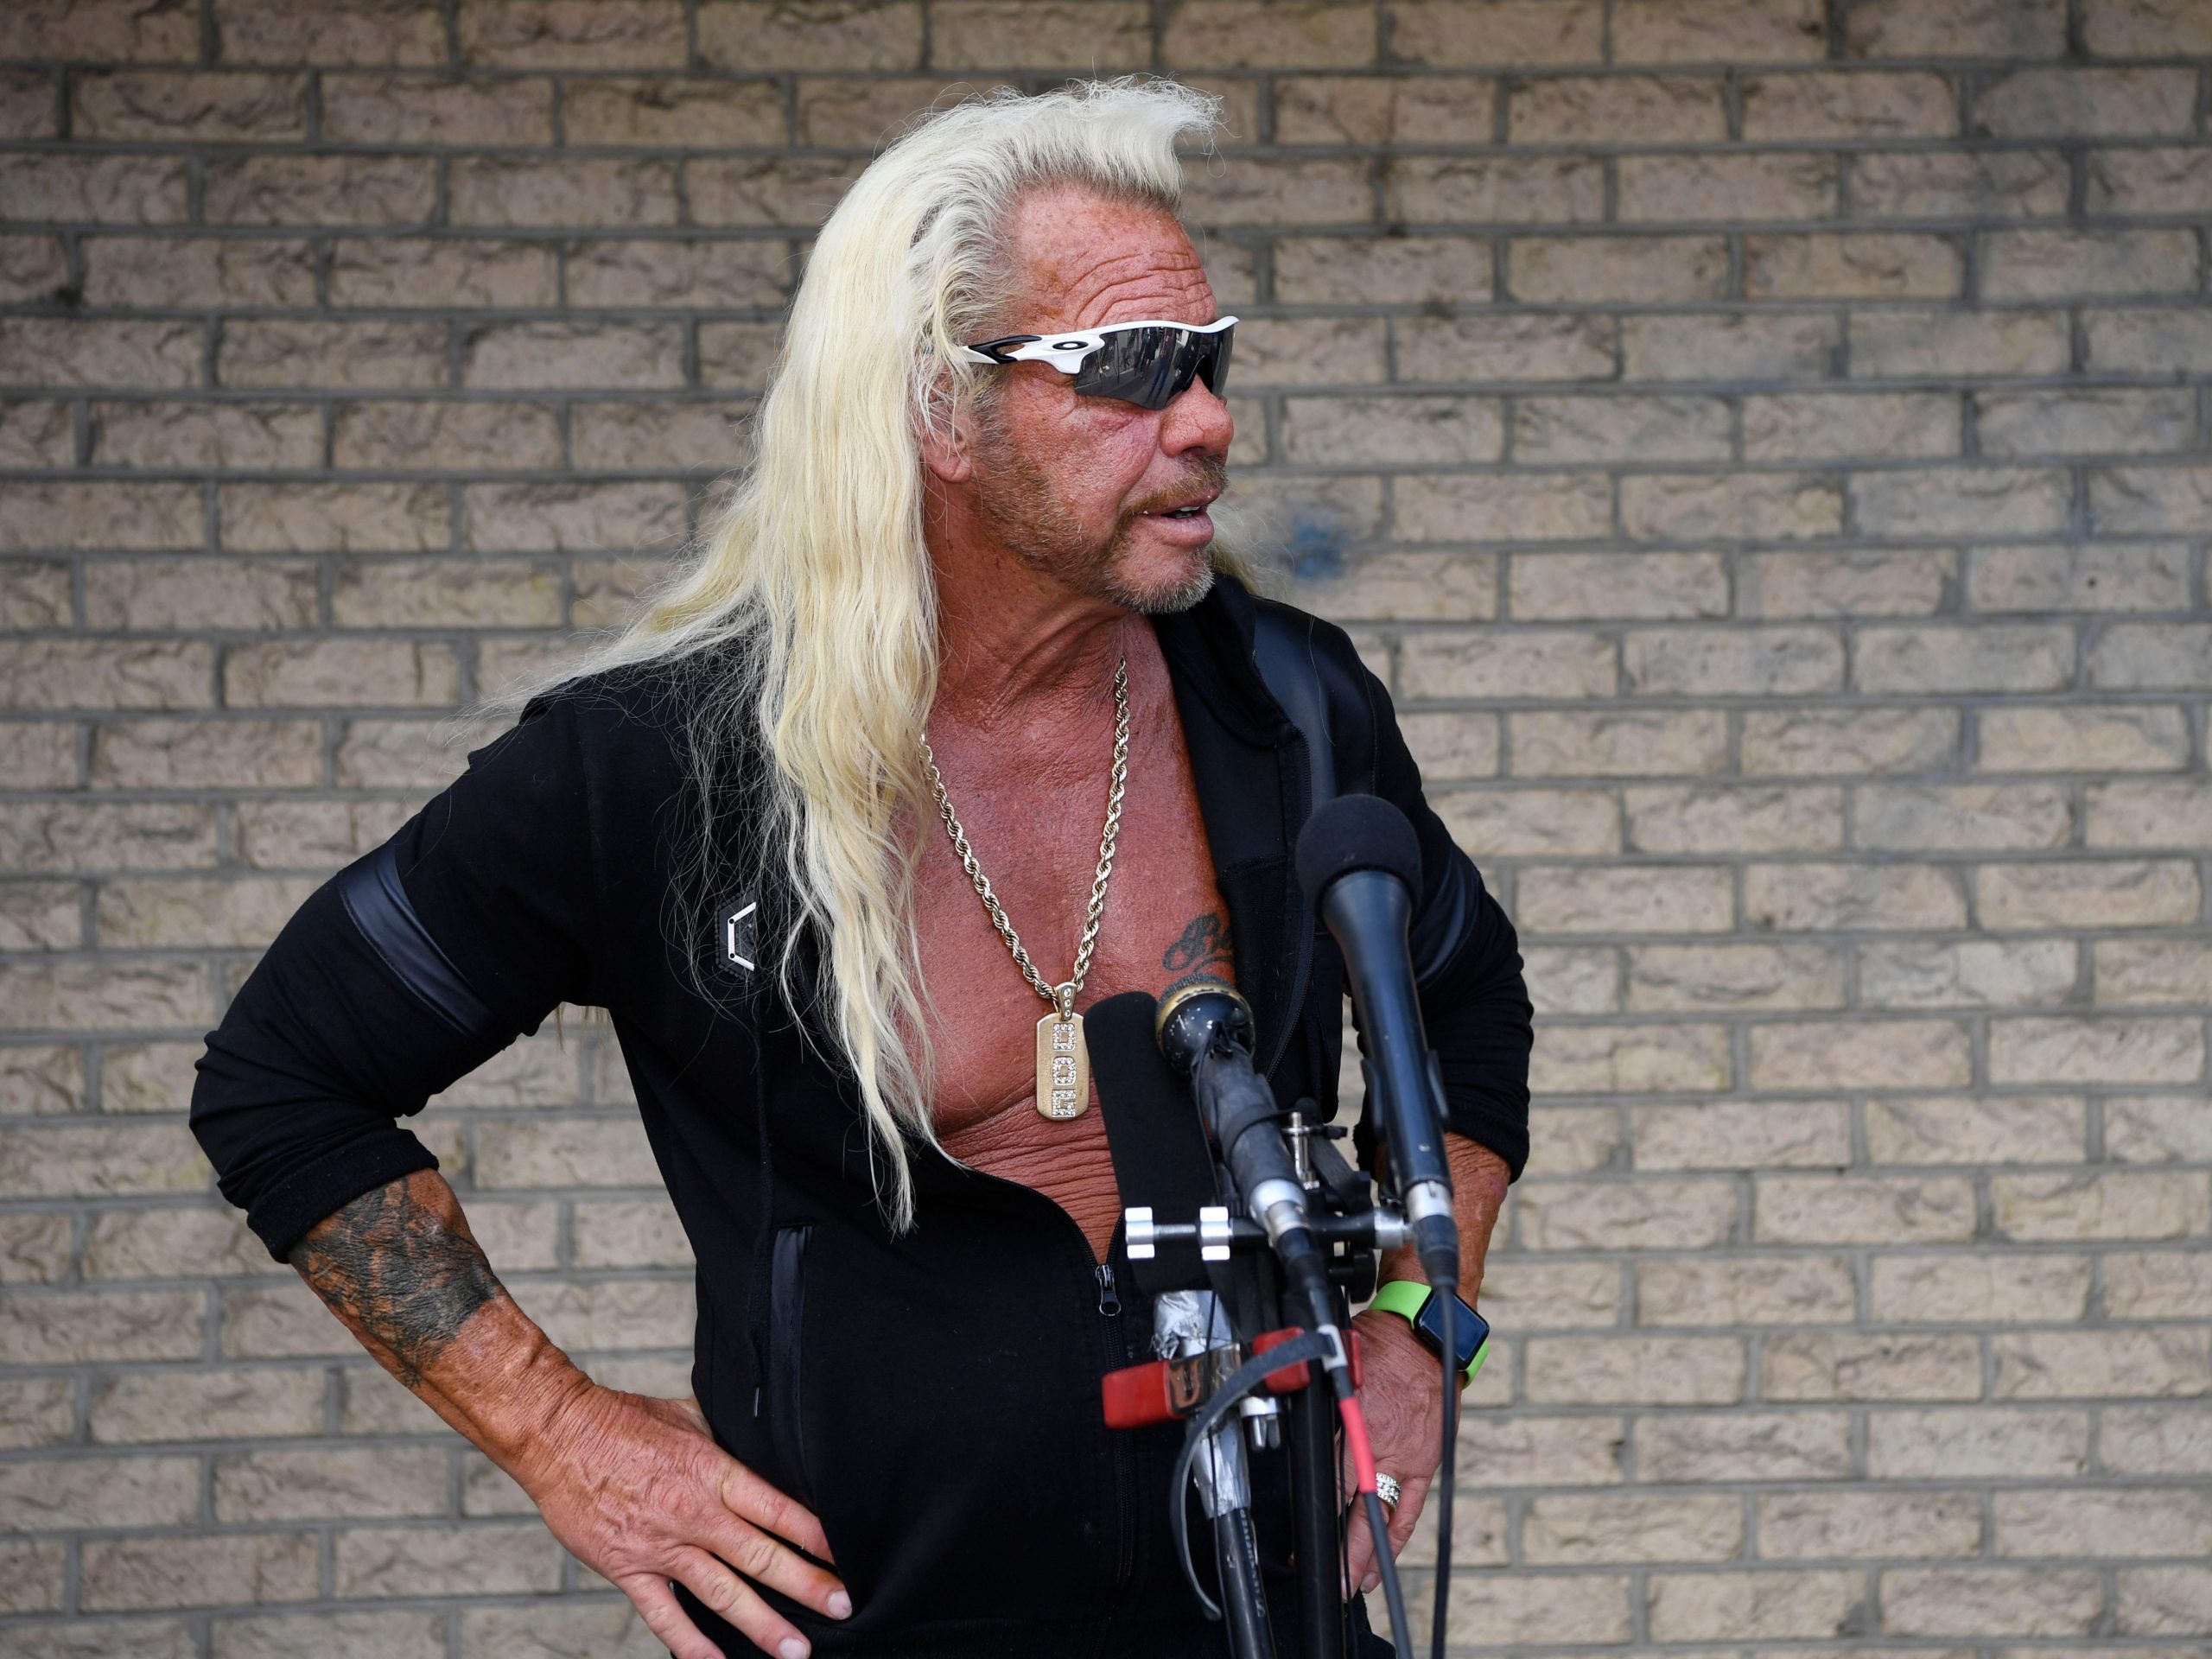 Dog the Bounty Hunter stands in front of a brick wall